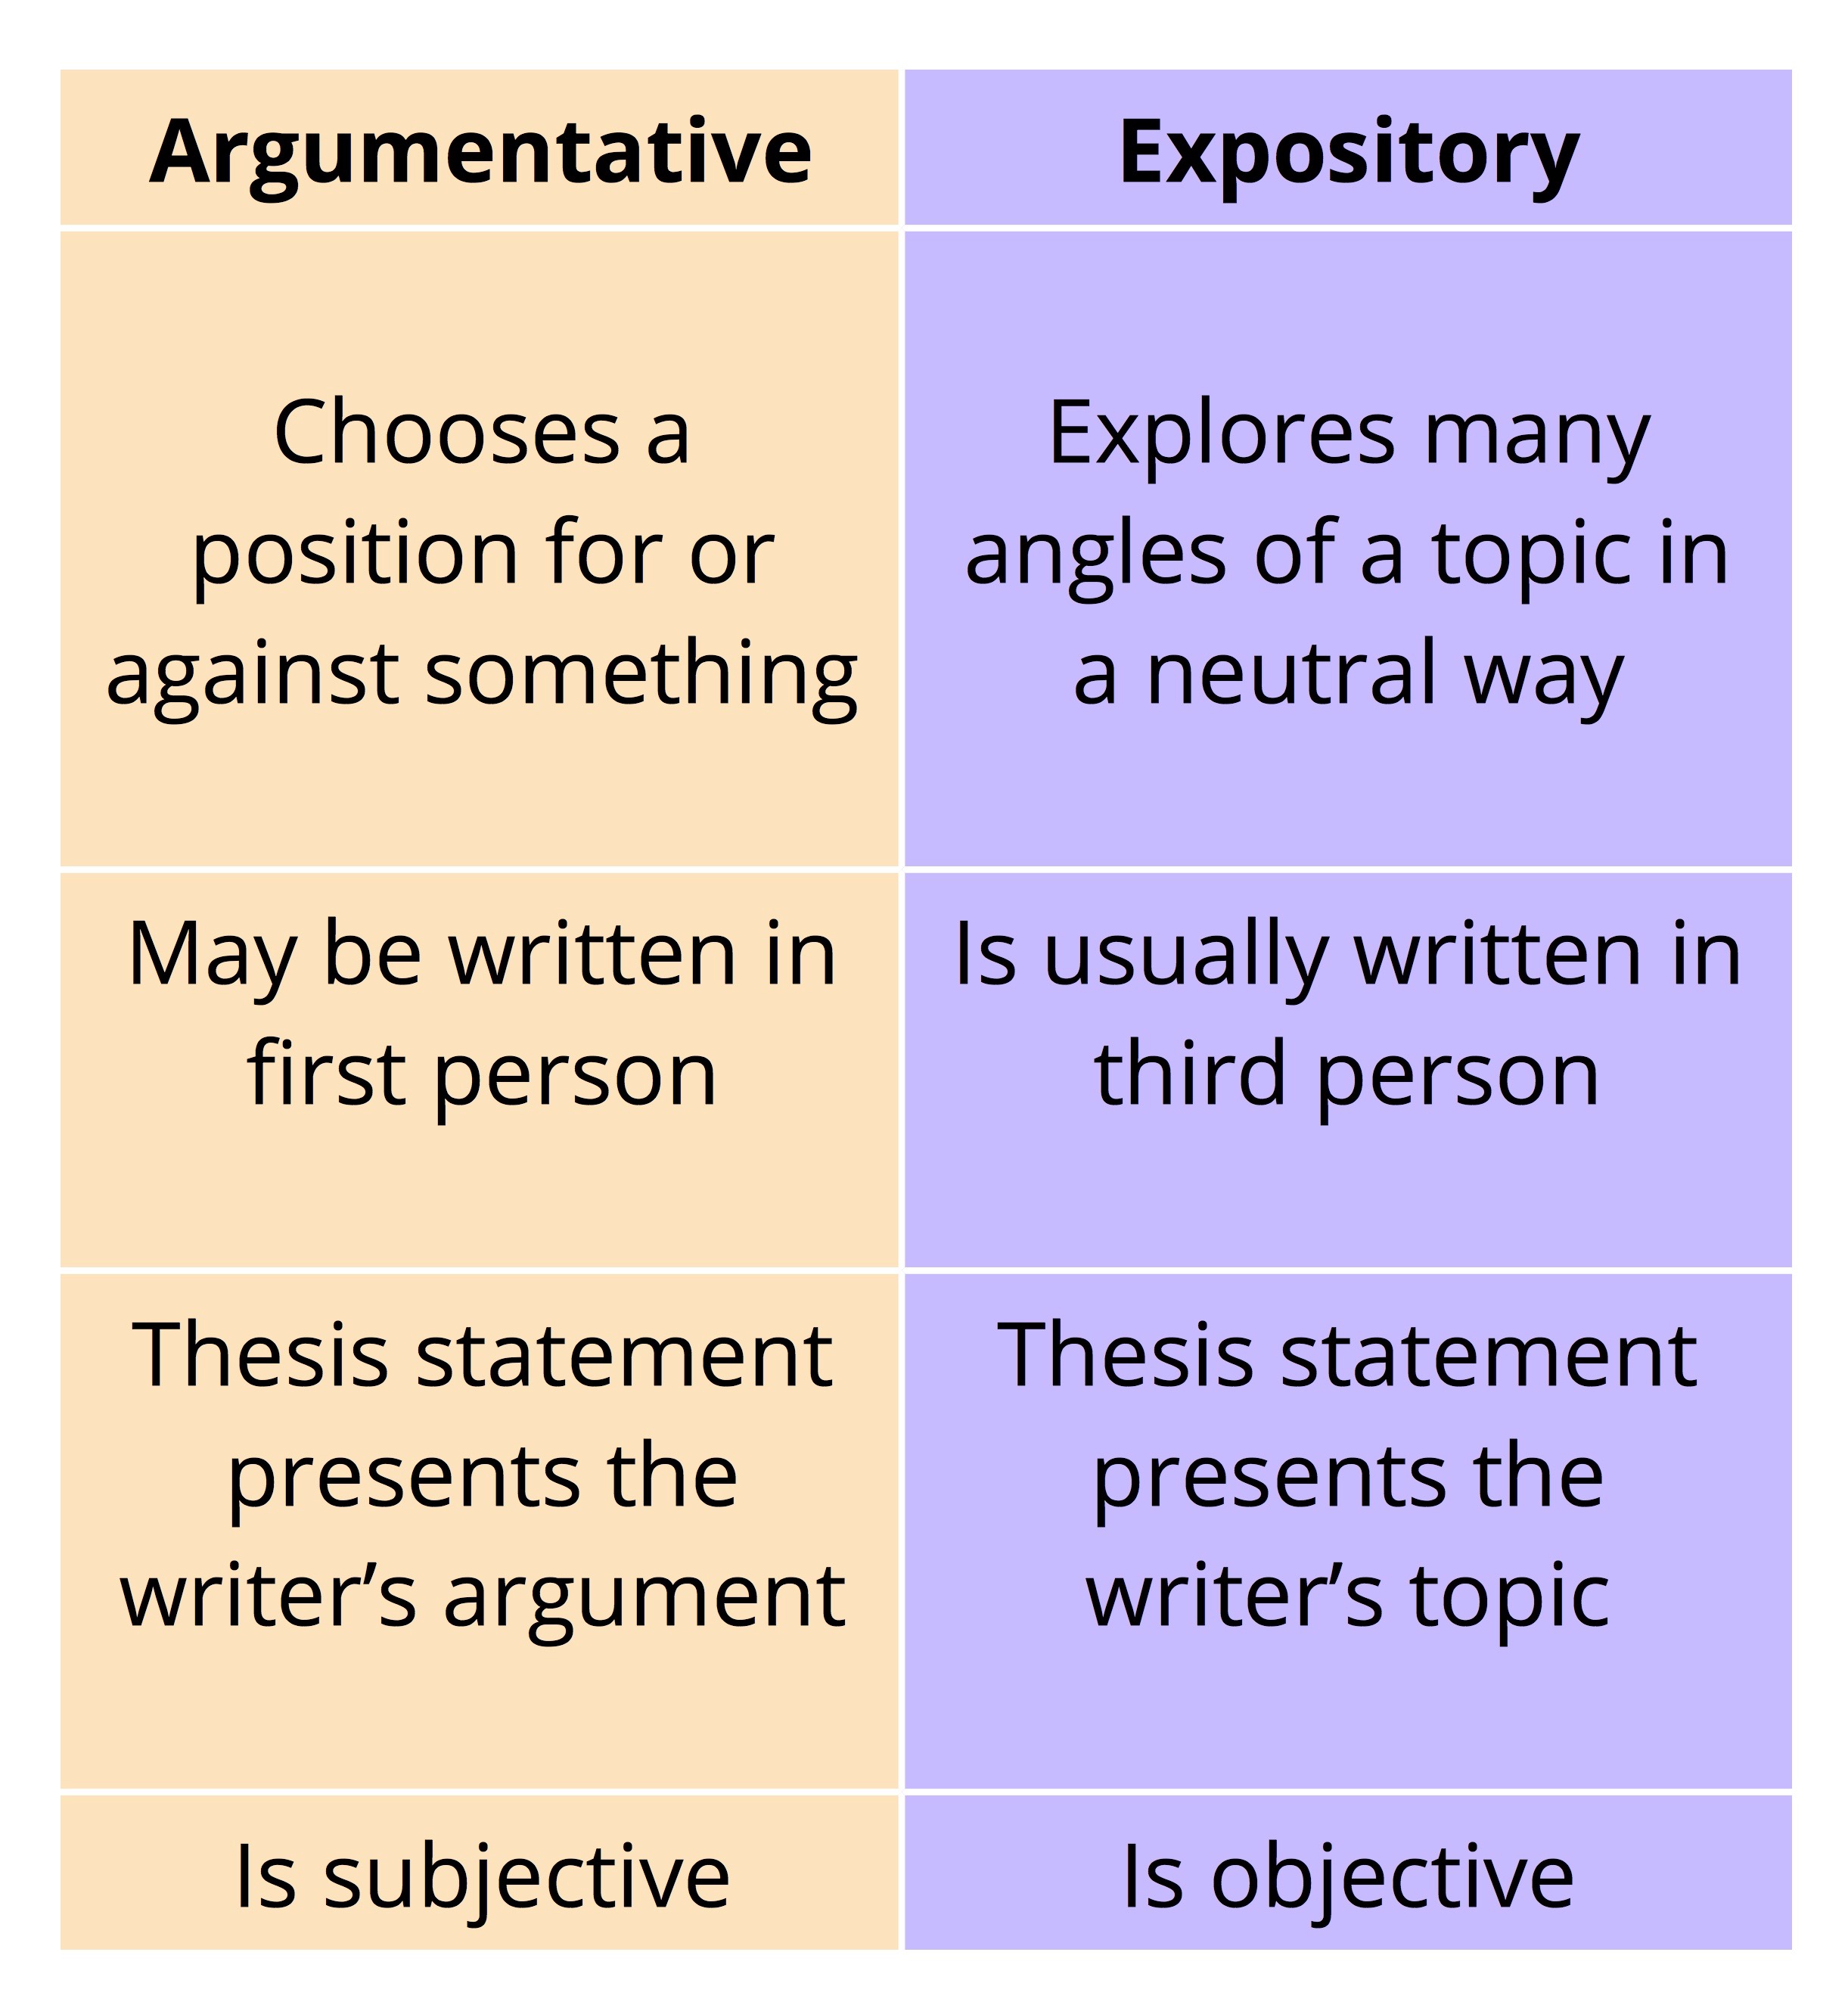 structure of the essay expository persuasive argumentative